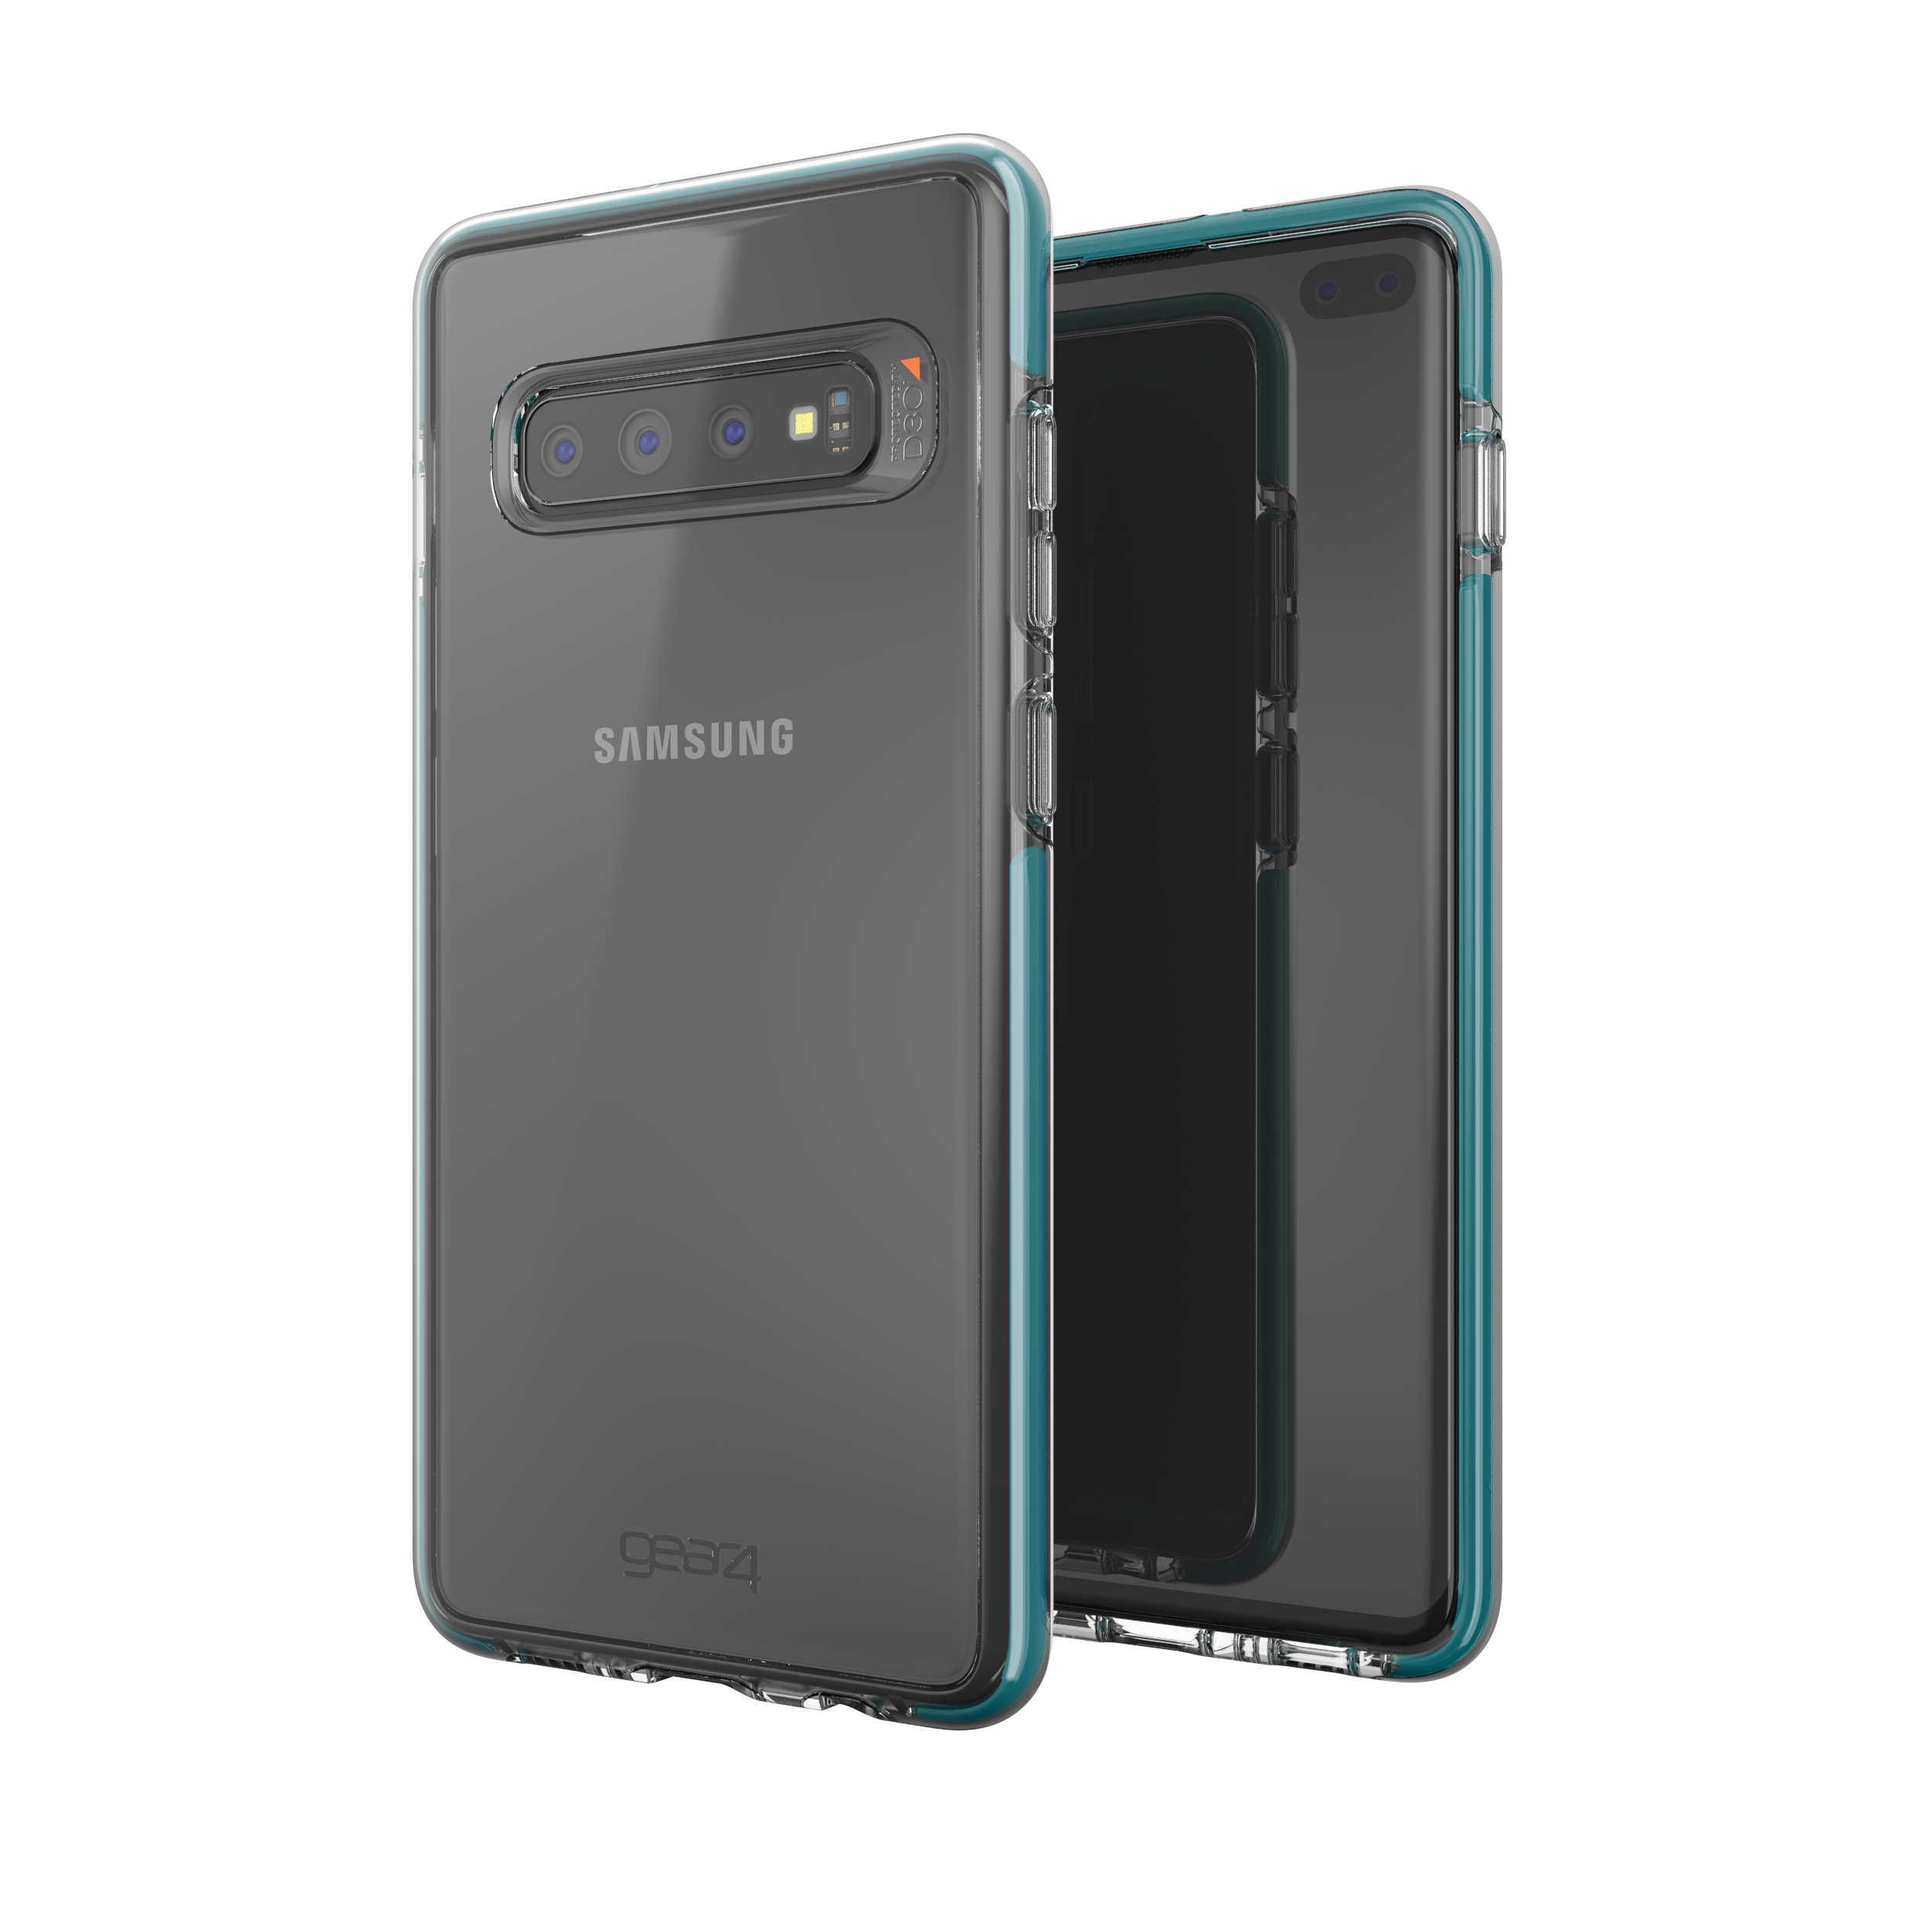 GEAR4 GALAXY Backcover, GREEN Piccadilly, SAMSUNG, S10+,